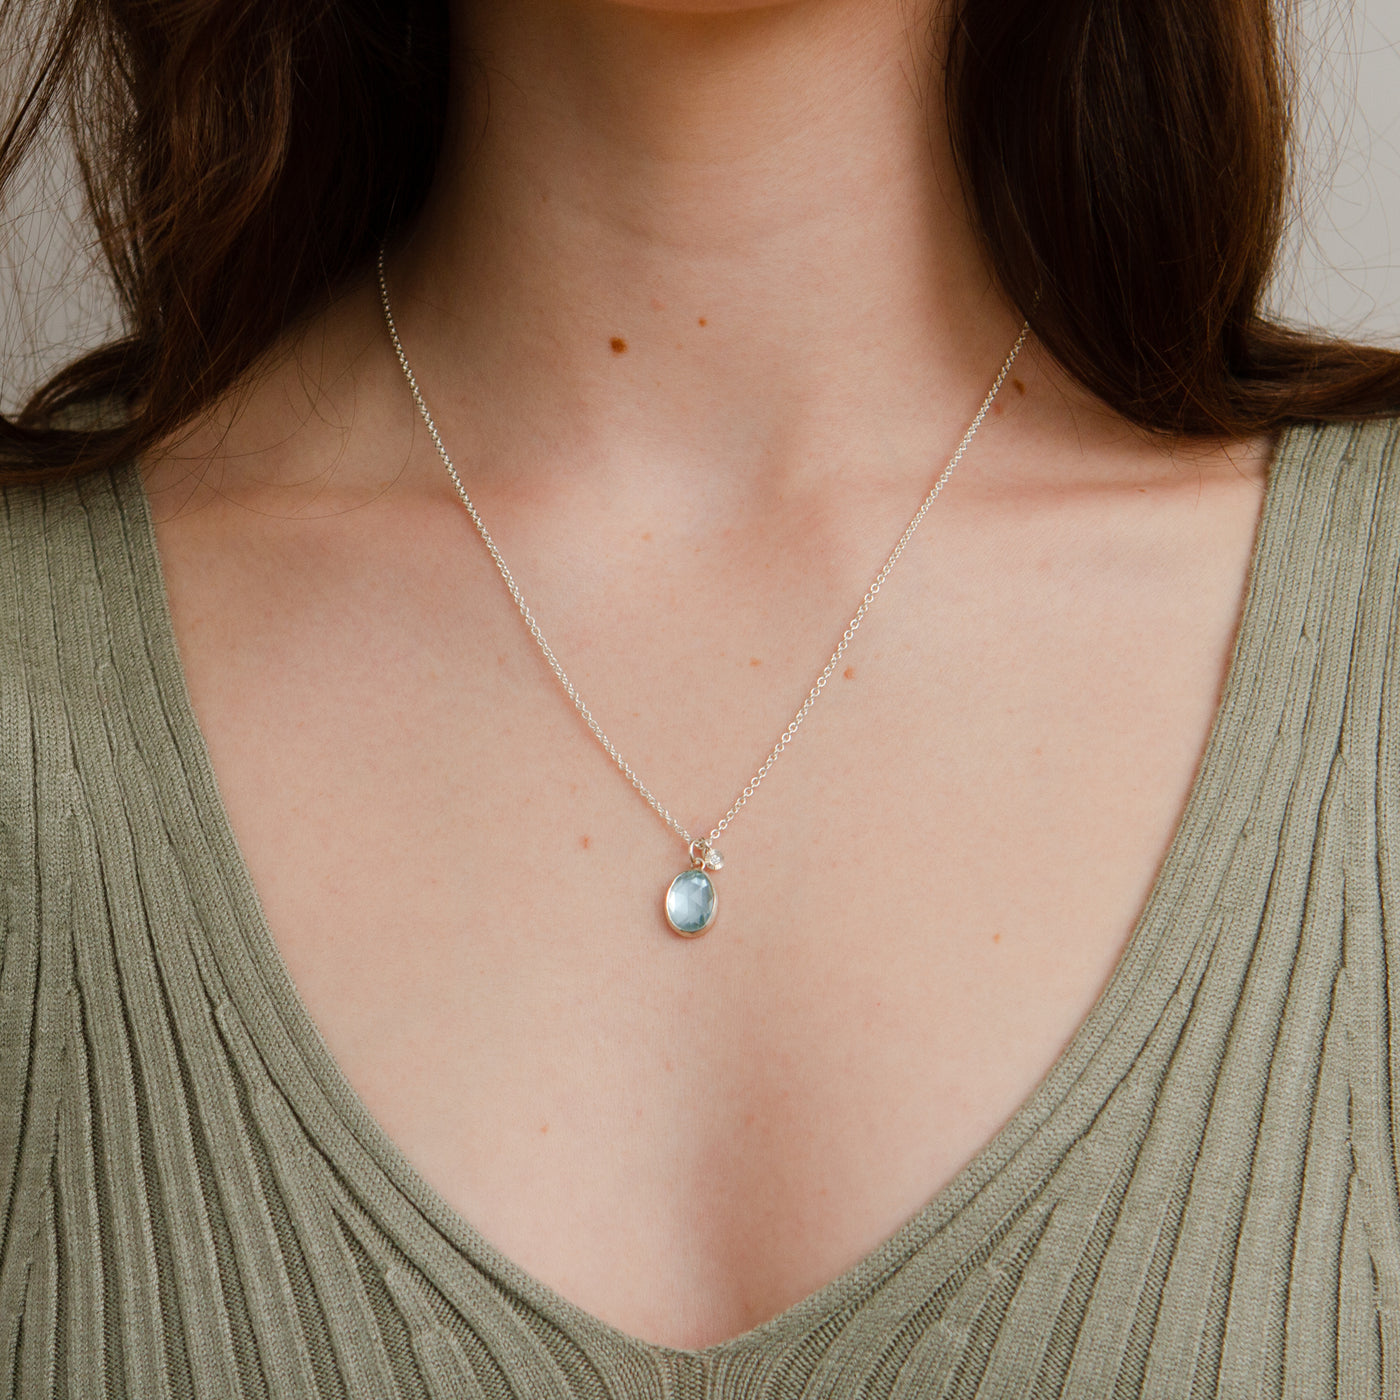 Aquamarine Silver Theia Necklace #5 on a model